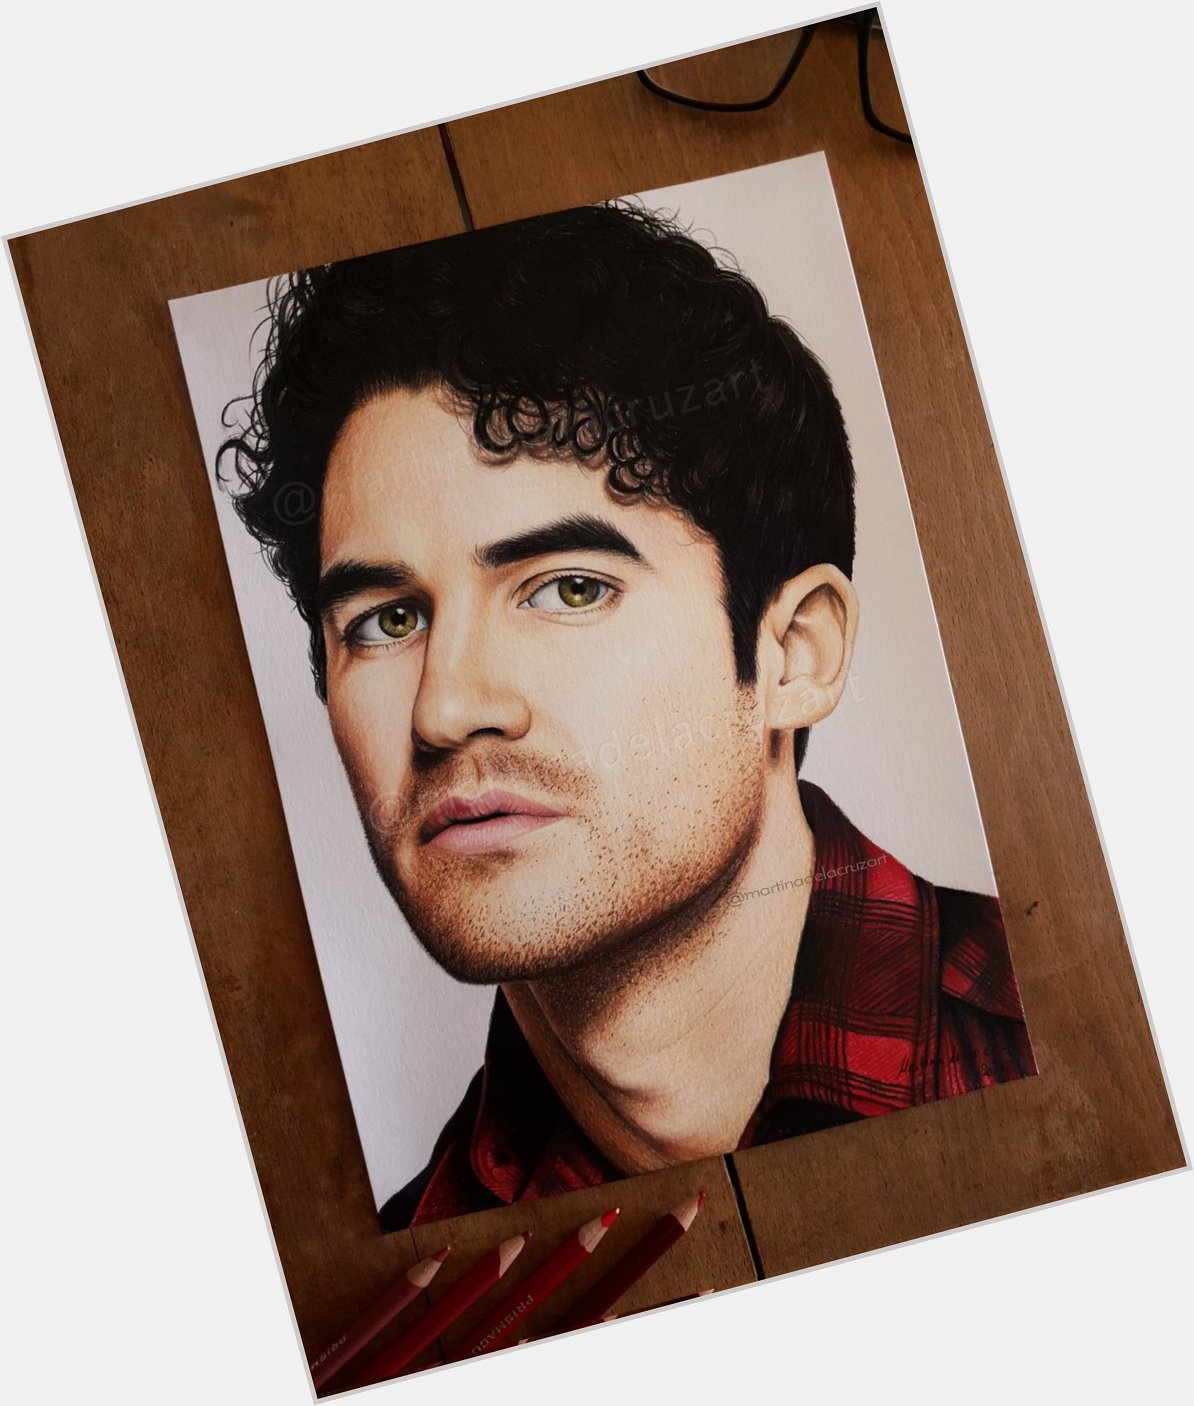 Happy birthday to Darren Criss!! I really loved drawing him!   